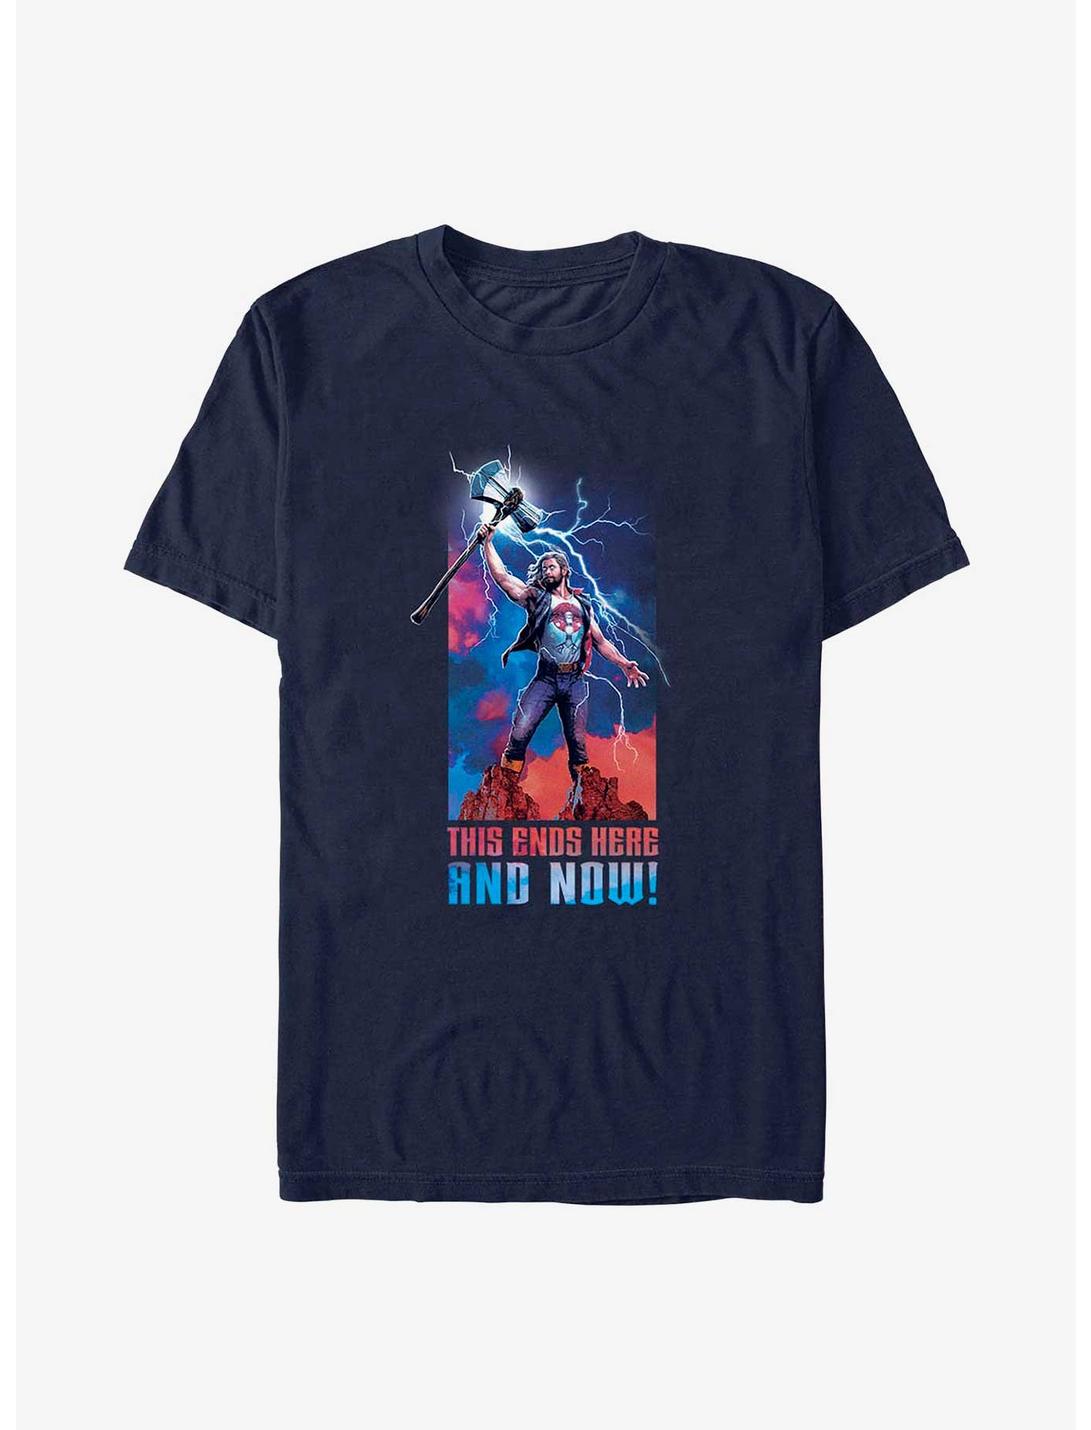 Marvel Thor: Love and Thunder Ends Here and Now T-Shirt, NAVY, hi-res